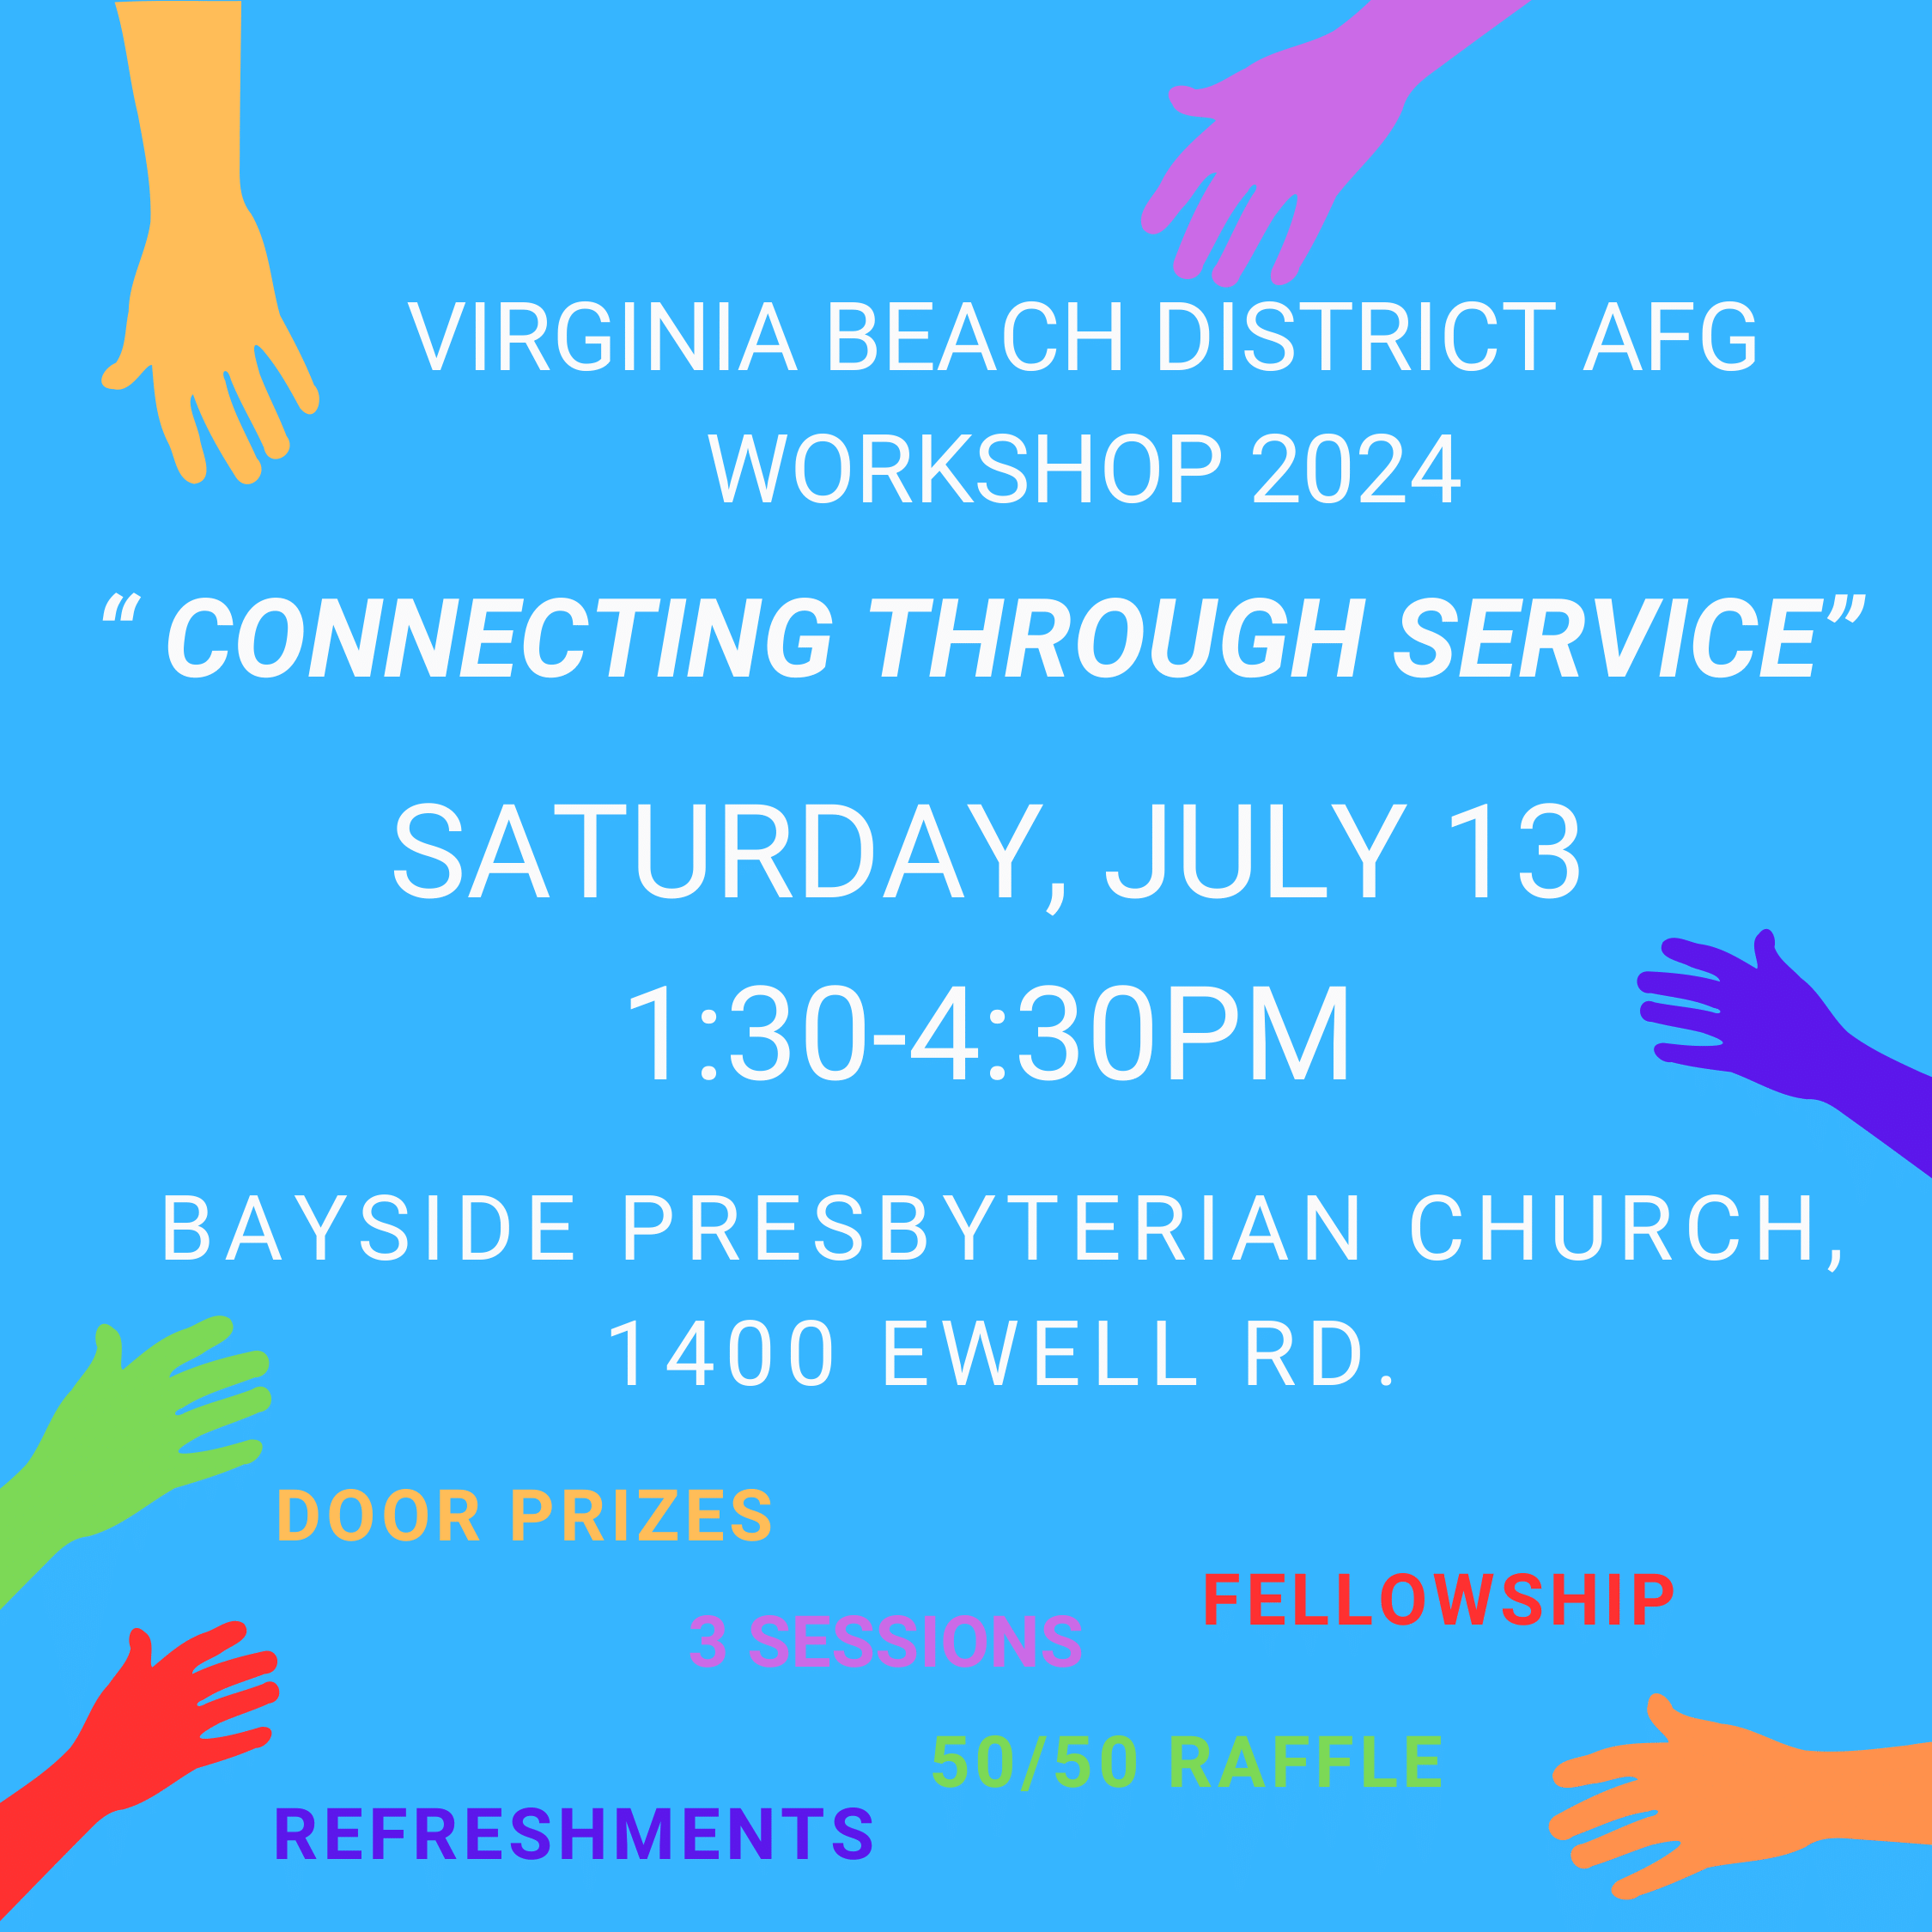 Connecting Through Service flyer image for event on July 13, 2024